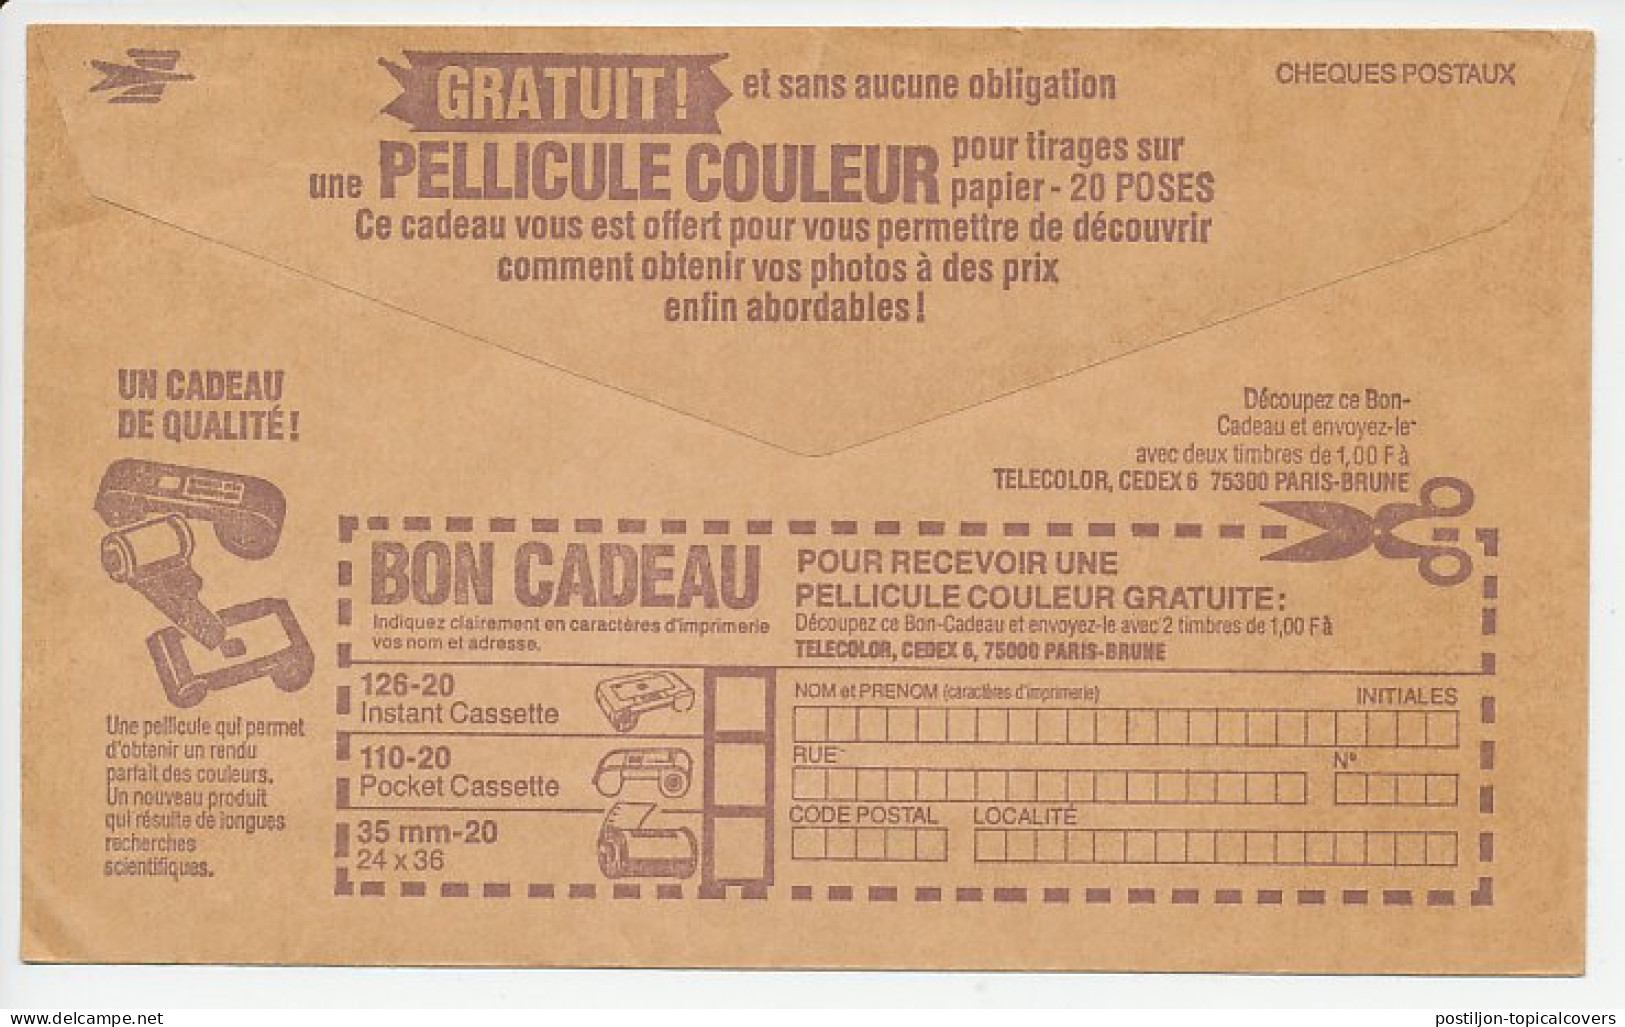 Postal Cheque Cover France Photographic Film - Fotografie